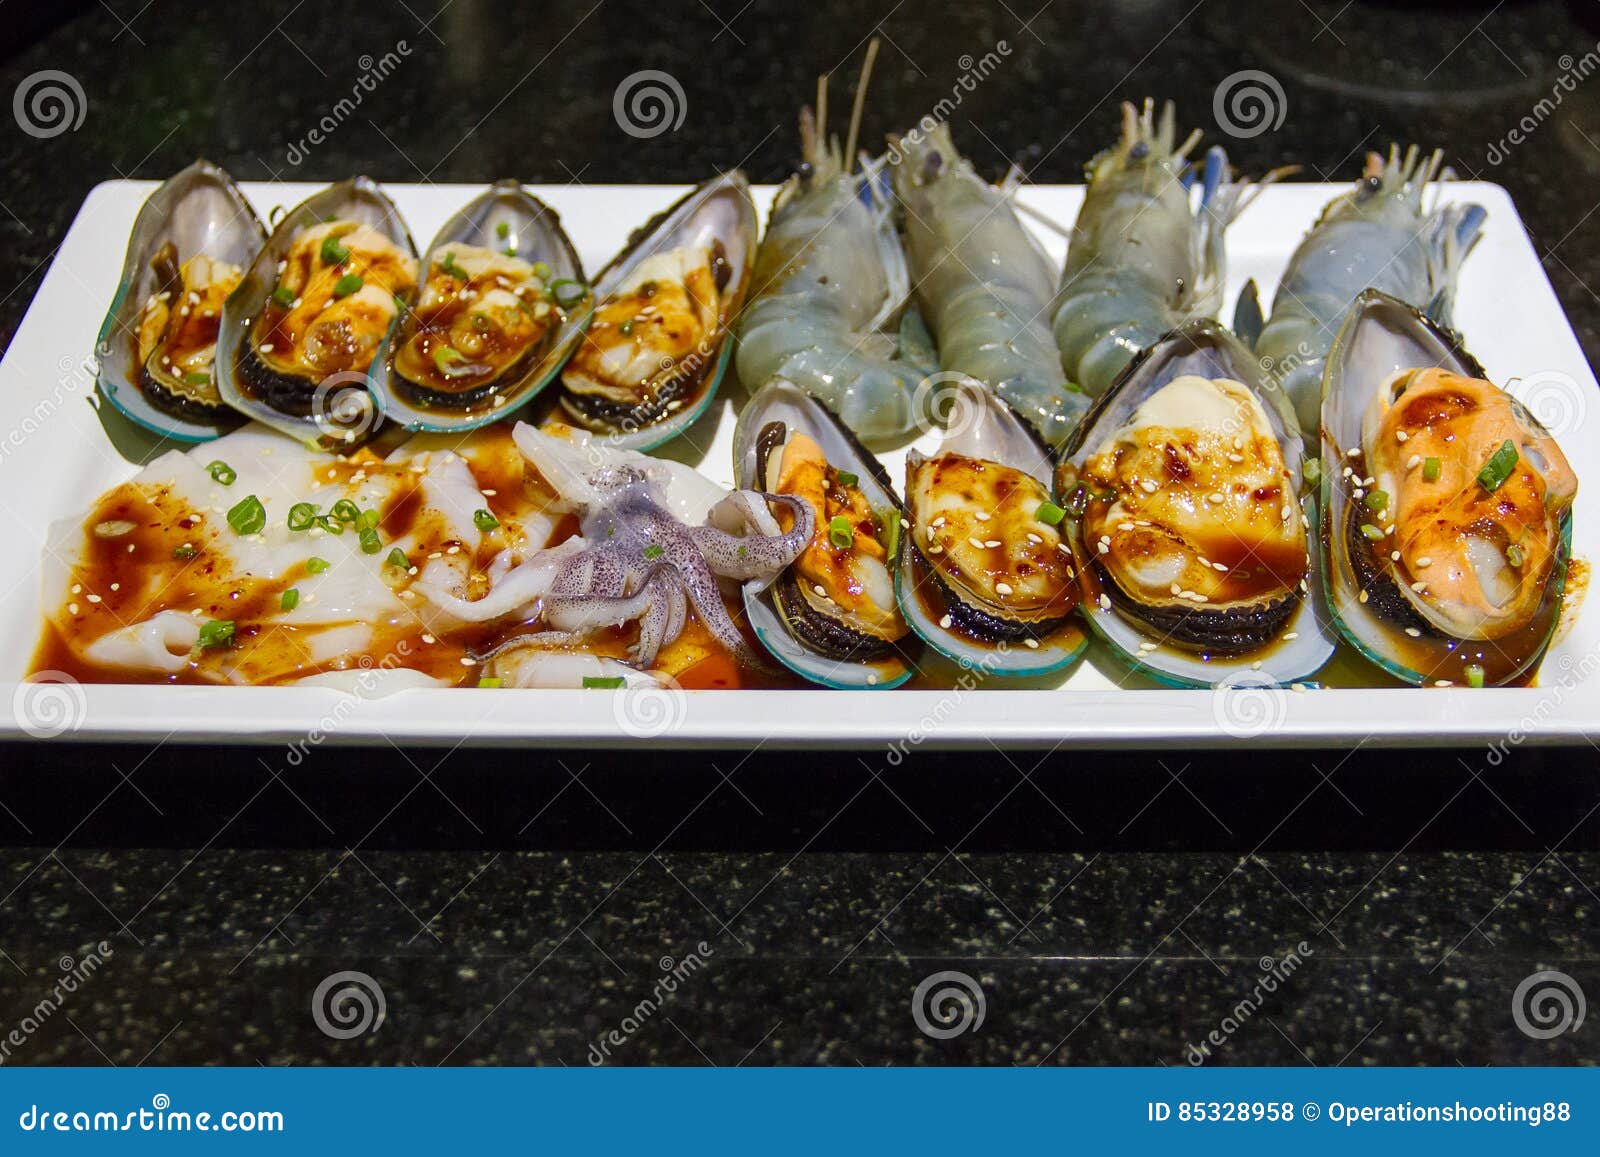 Seafood Place on a Plate for Grilled Stock Photo - Image of plate